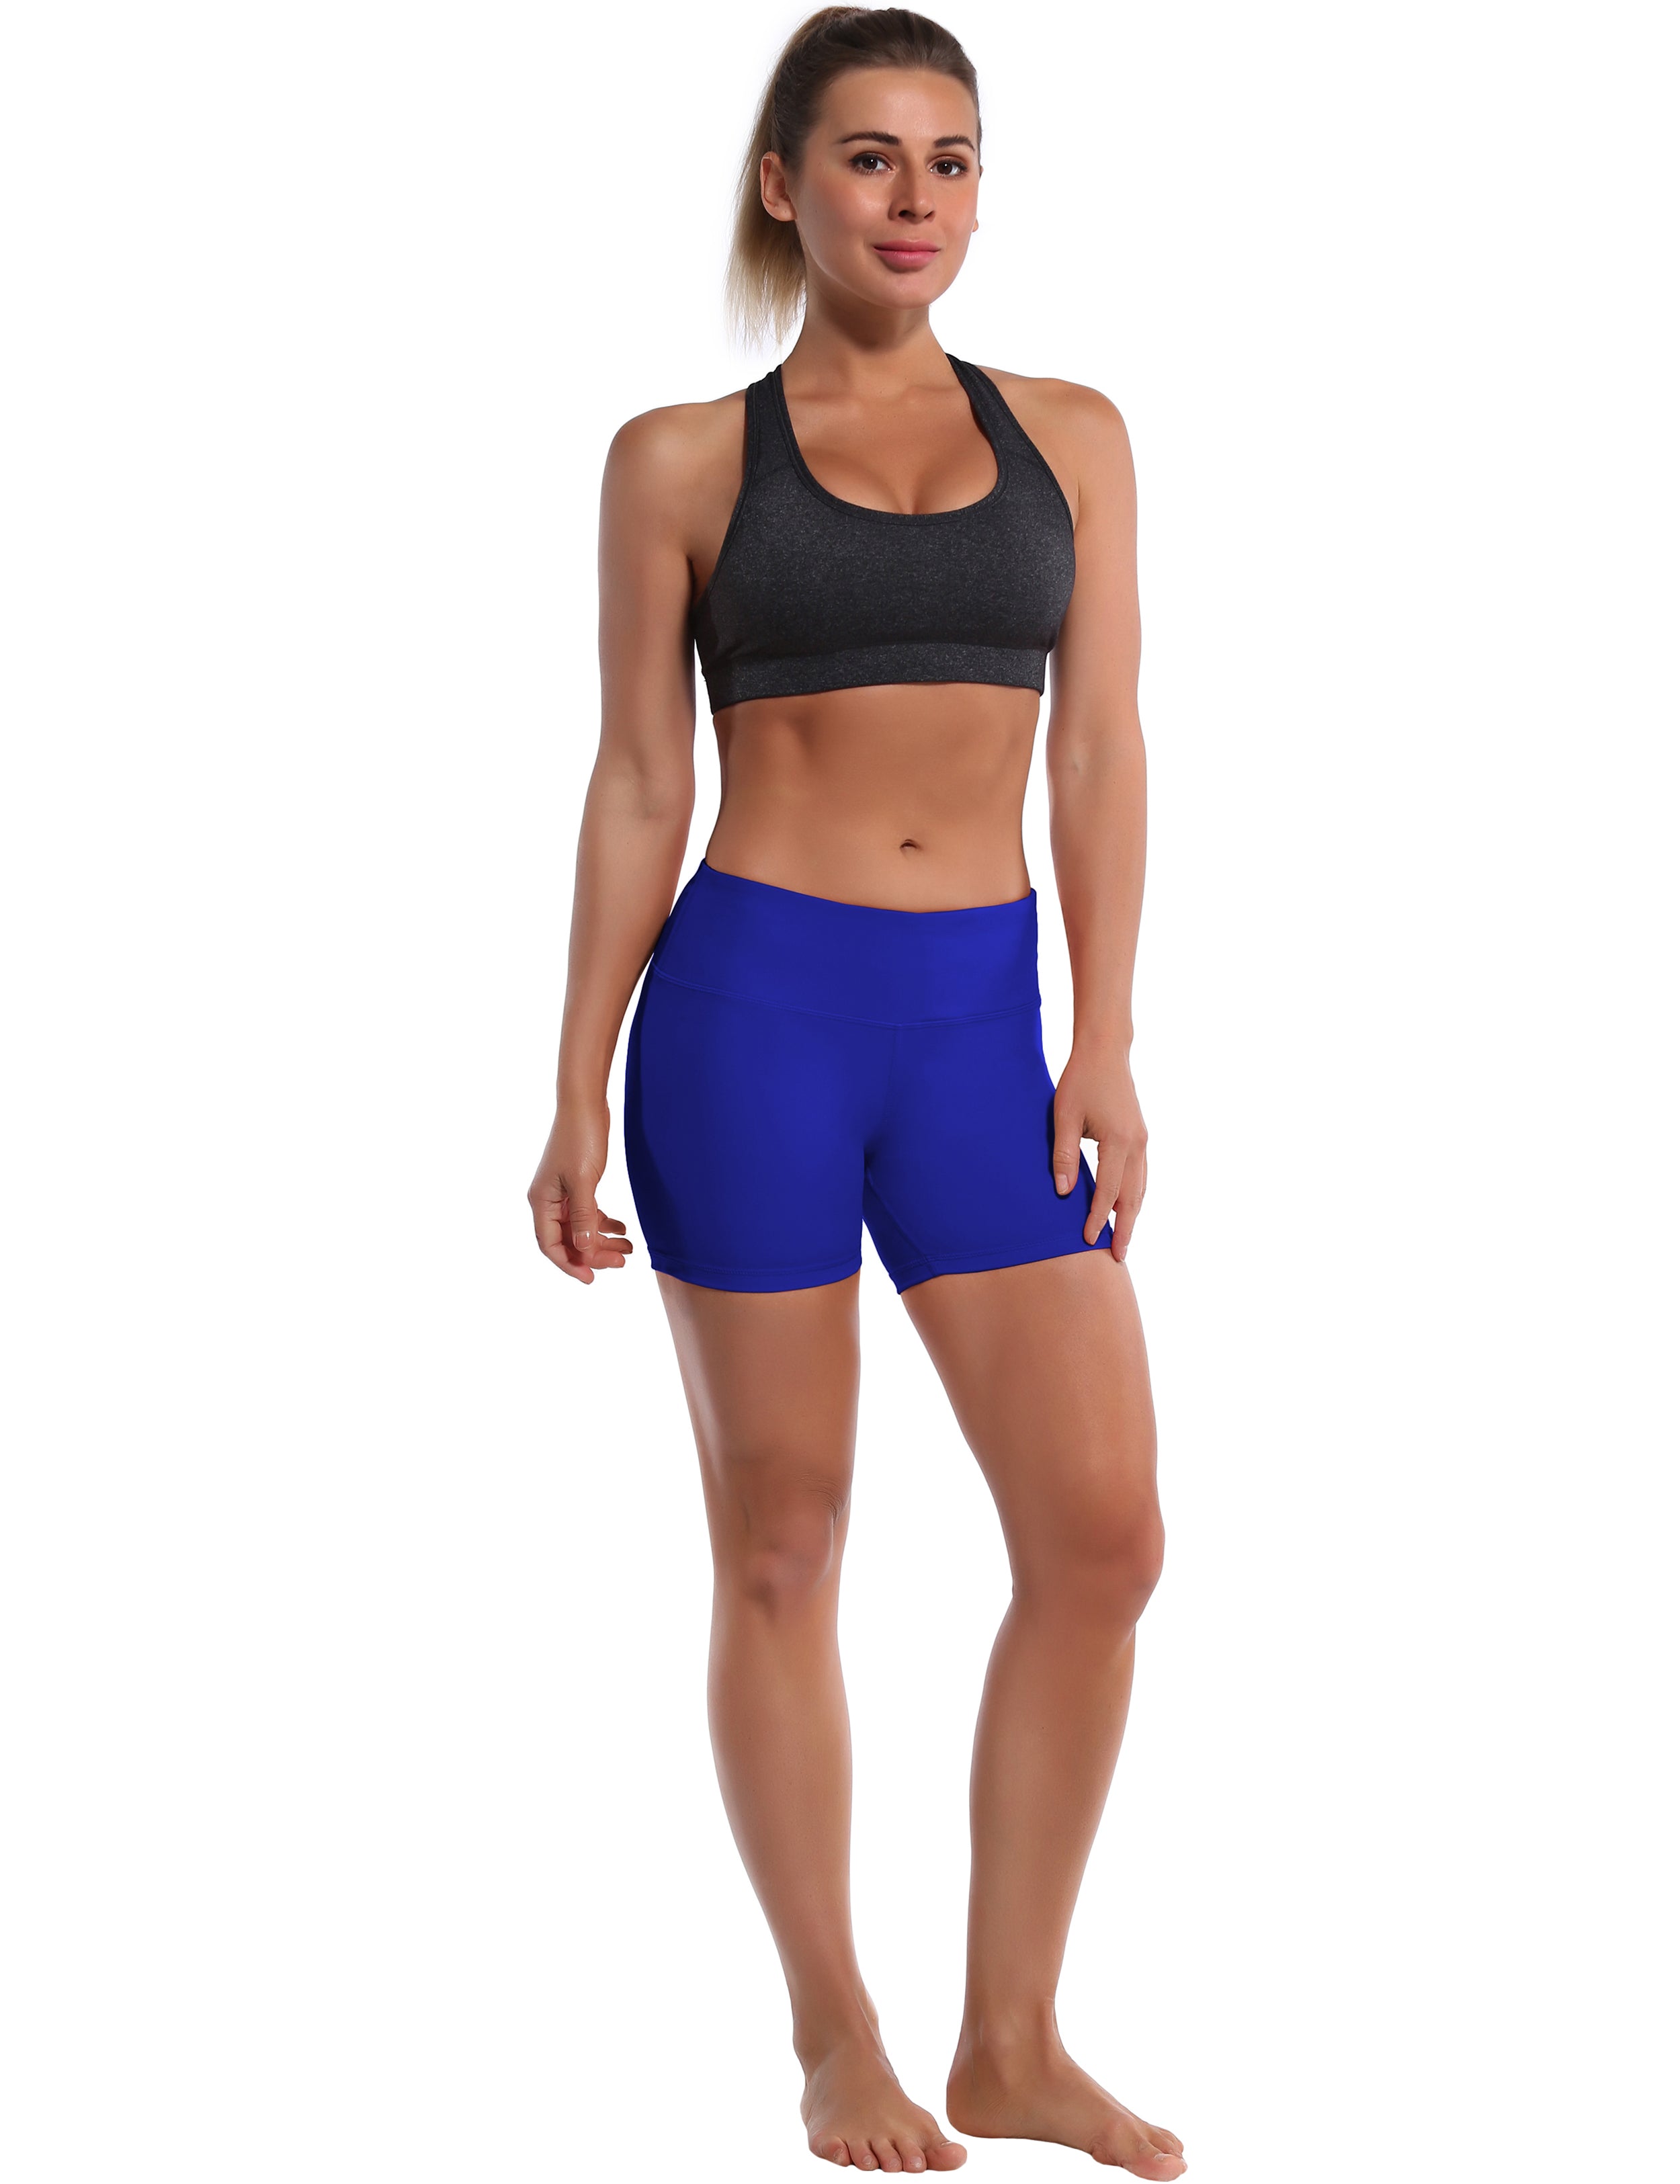 4" Jogging Shorts navy Sleek, soft, smooth and totally comfortable: our newest style is here. Softest-ever fabric High elasticity High density 4-way stretch Fabric doesn't attract lint easily No see-through Moisture-wicking Machine wash 75% Nylon, 25% Spandex